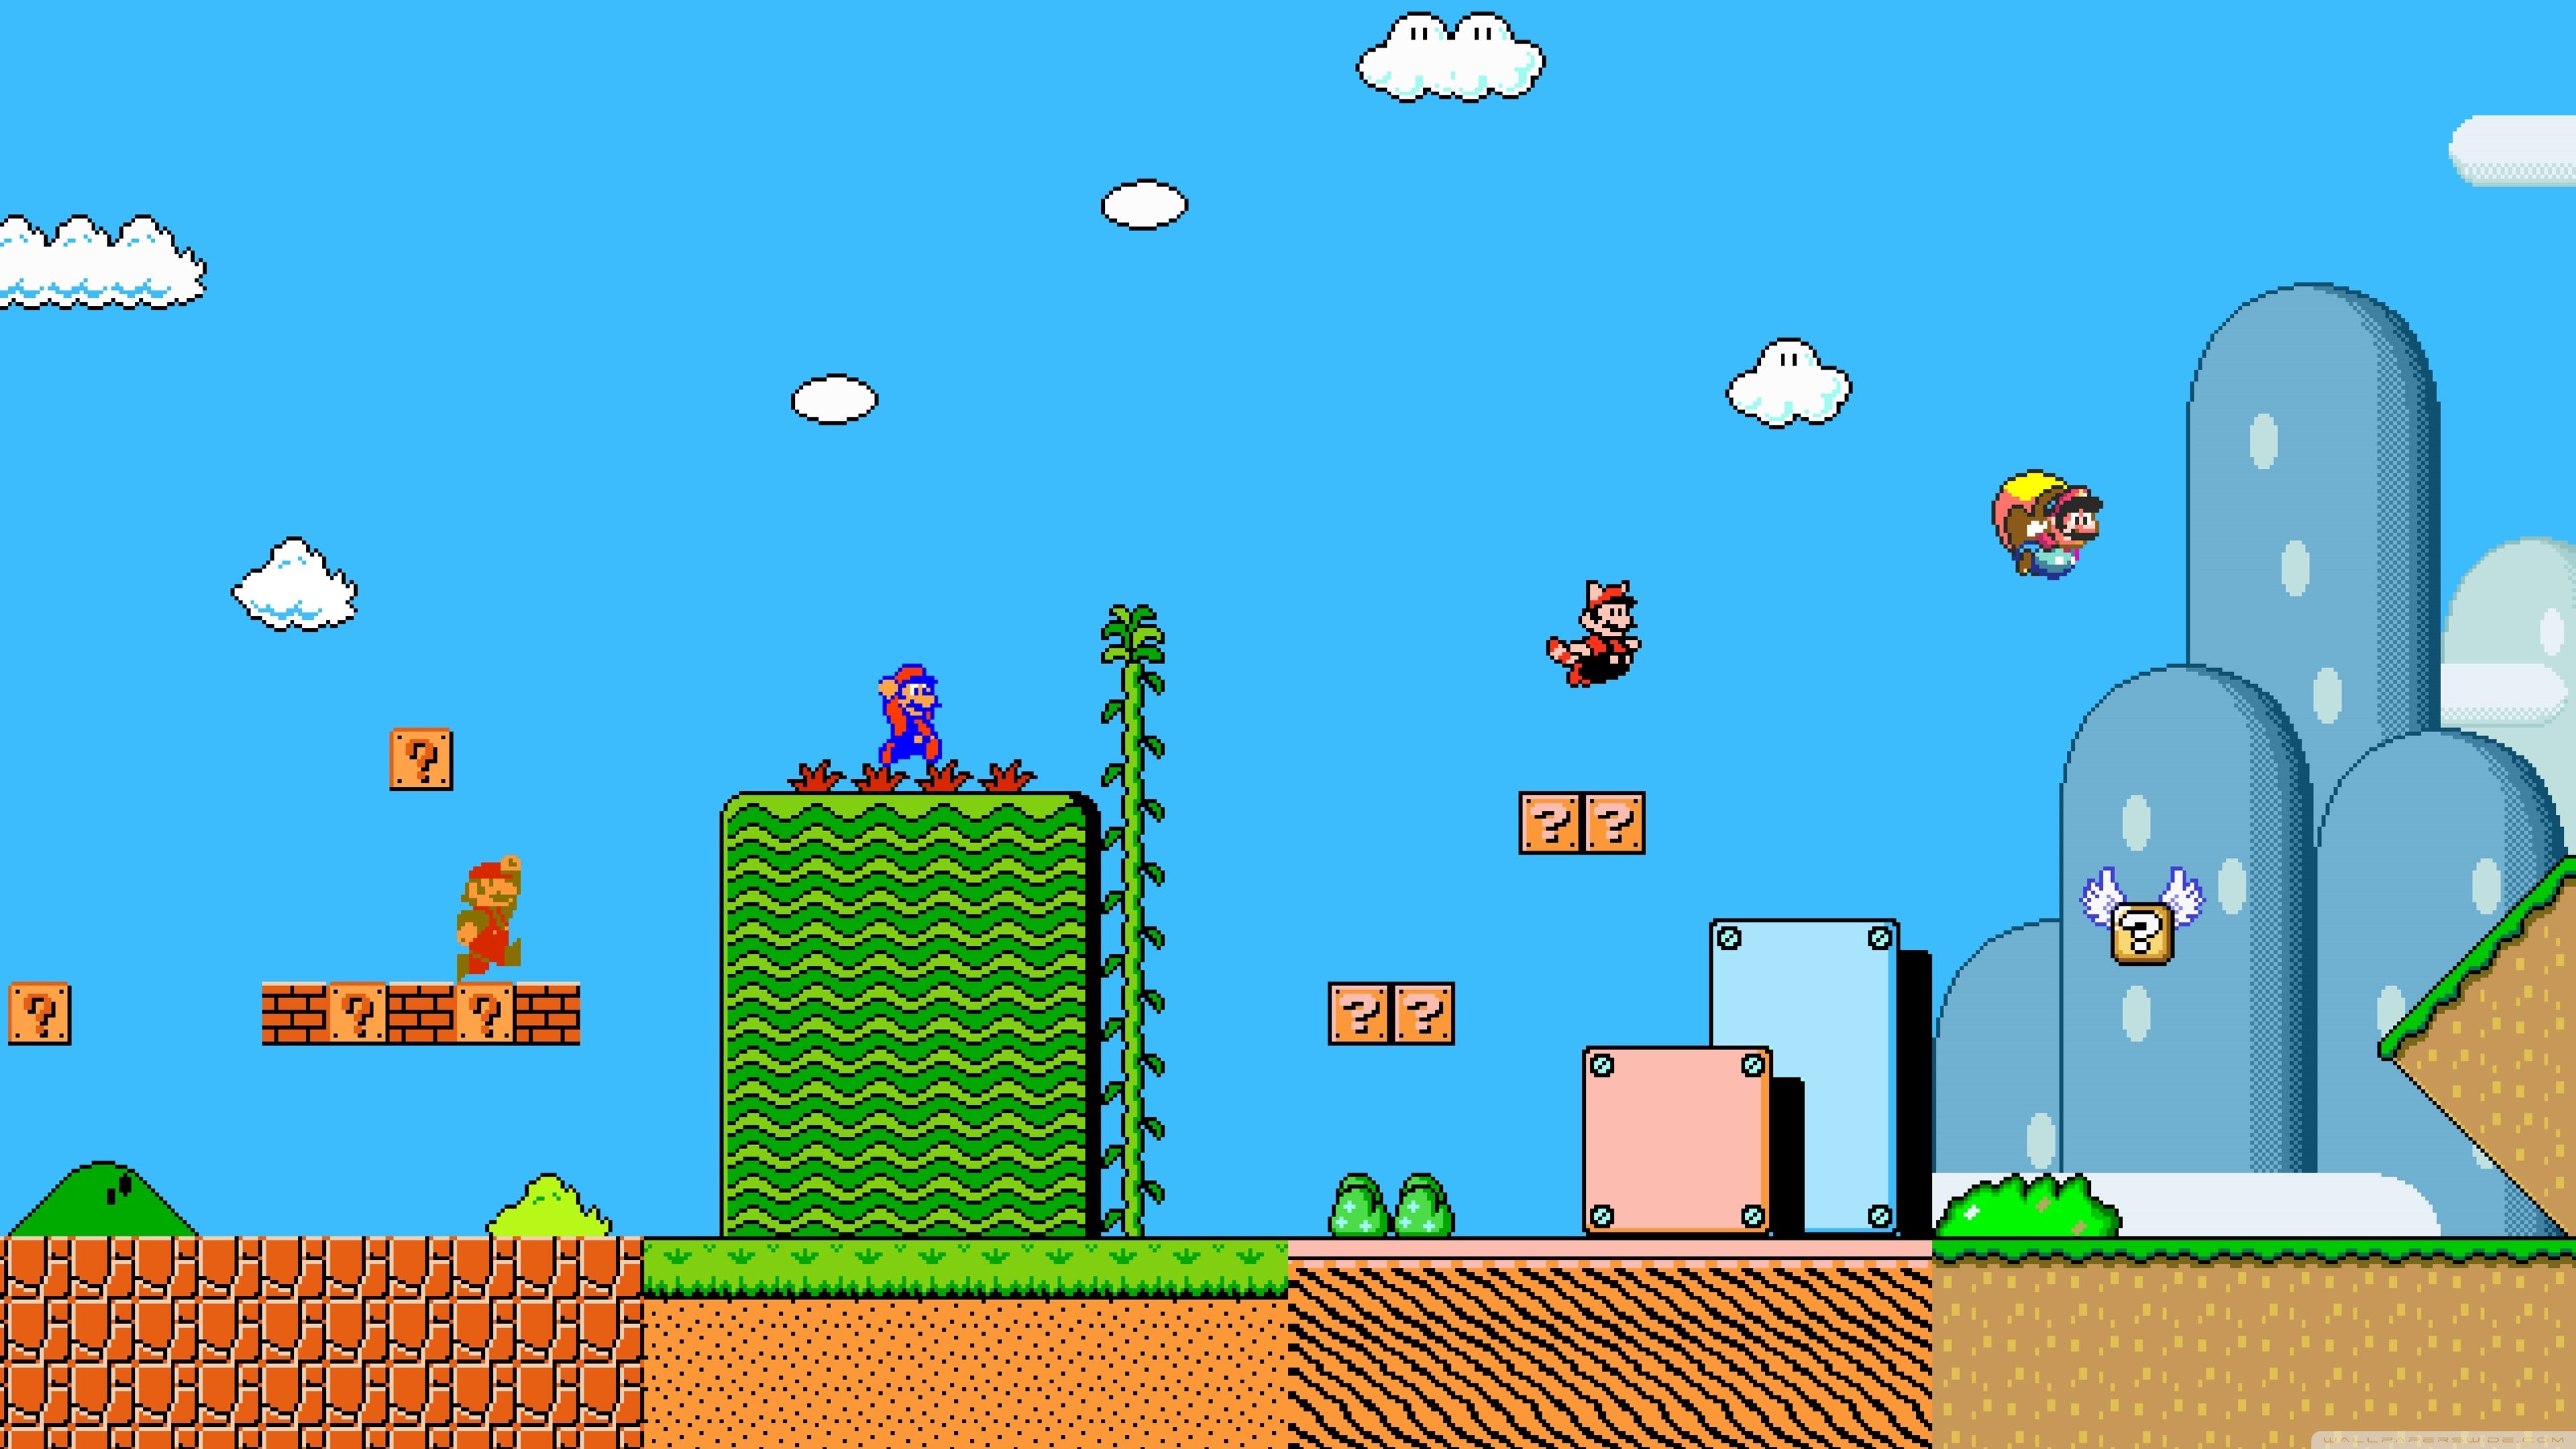 A Super Mario game from the 80s with Mario flying through the air - Super Mario